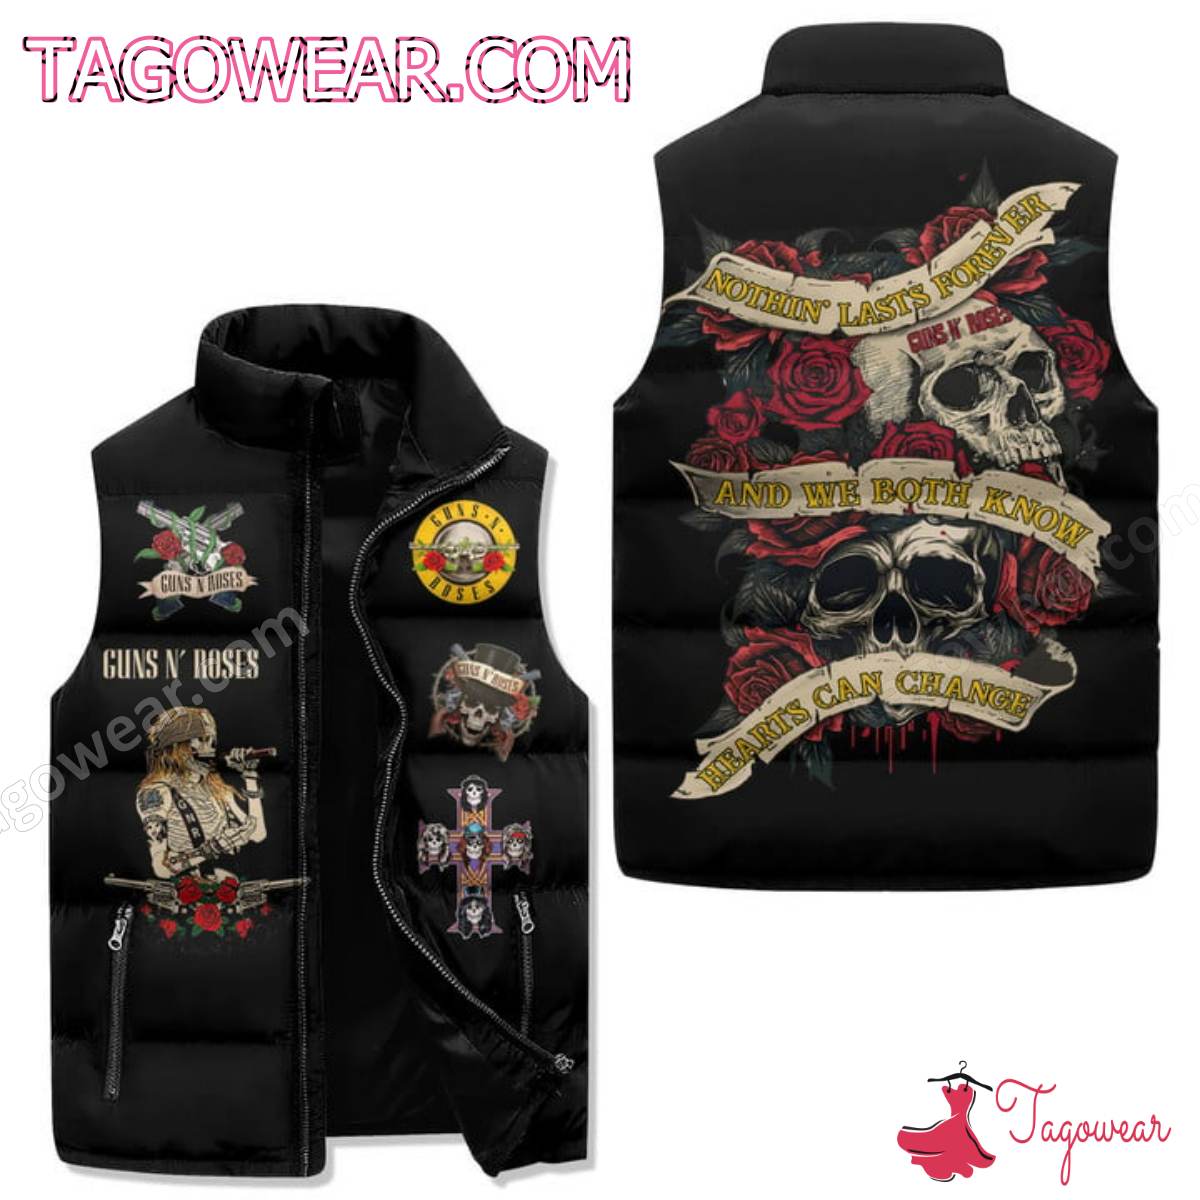 Guns N' Rose Nothin' Last Forever And We Both Know Hearts Can Change Puffer Vest